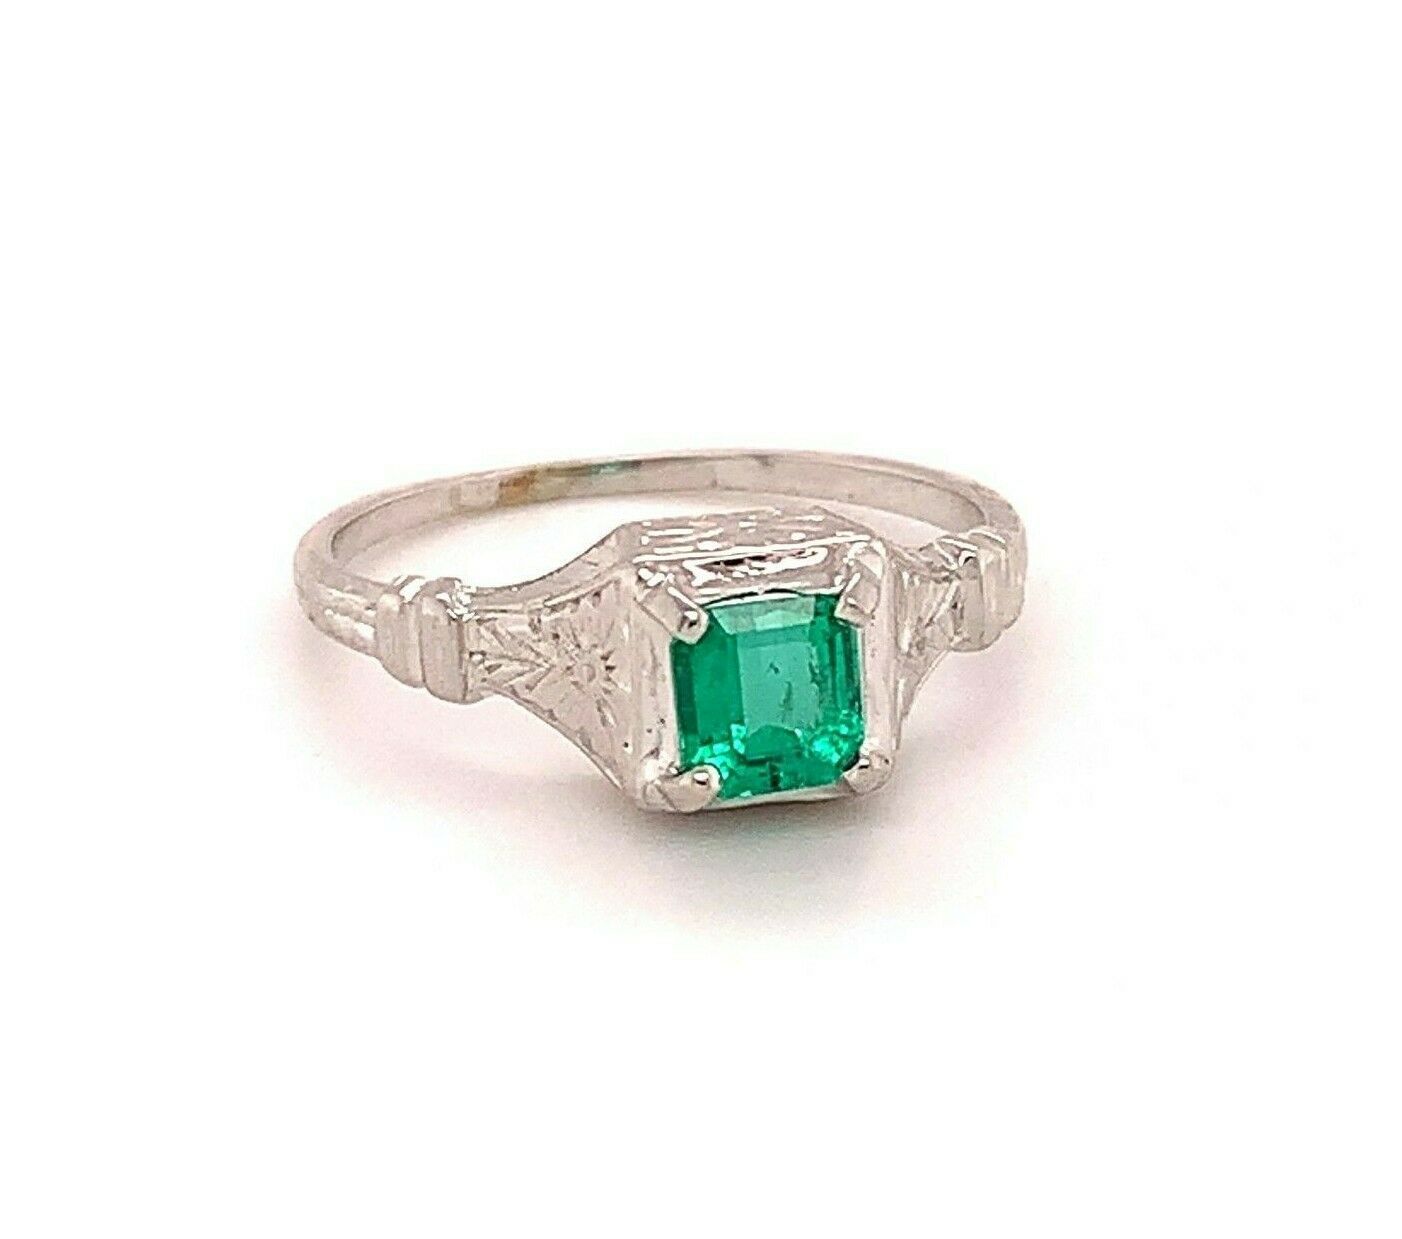 Primary image for 18k Gold Art Deco .56ct Genuine Natural Emerald Ring w/Engraved Flowers (#J4856)